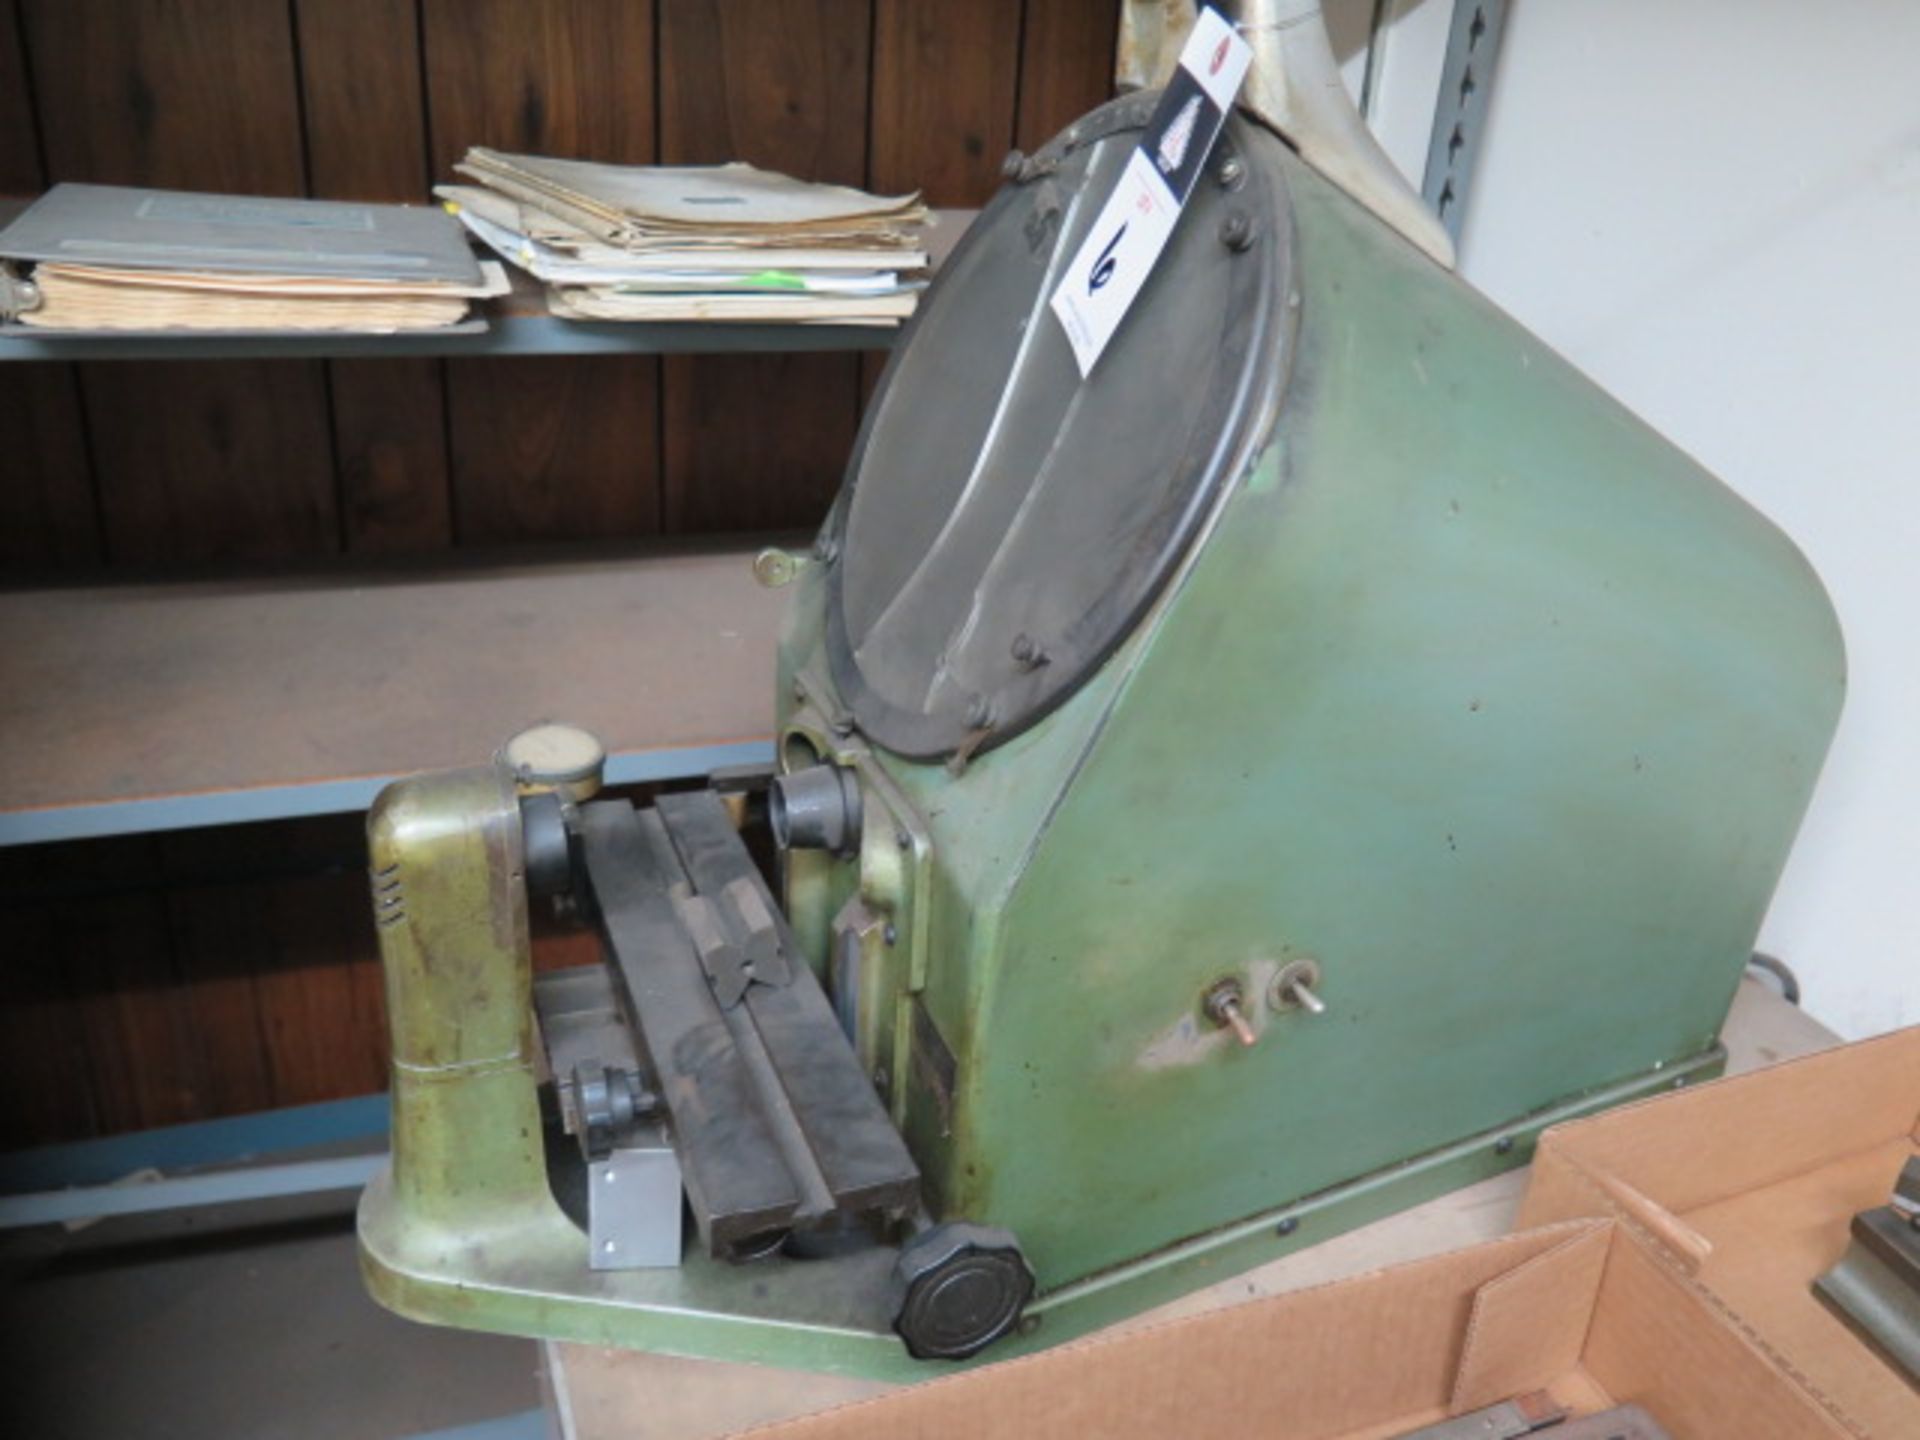 Pacific Gage mdl. 100 9" Optical Comparator (BROKEN LENS) (SOLD AS-IS - NO WARRANTY) - Image 2 of 7